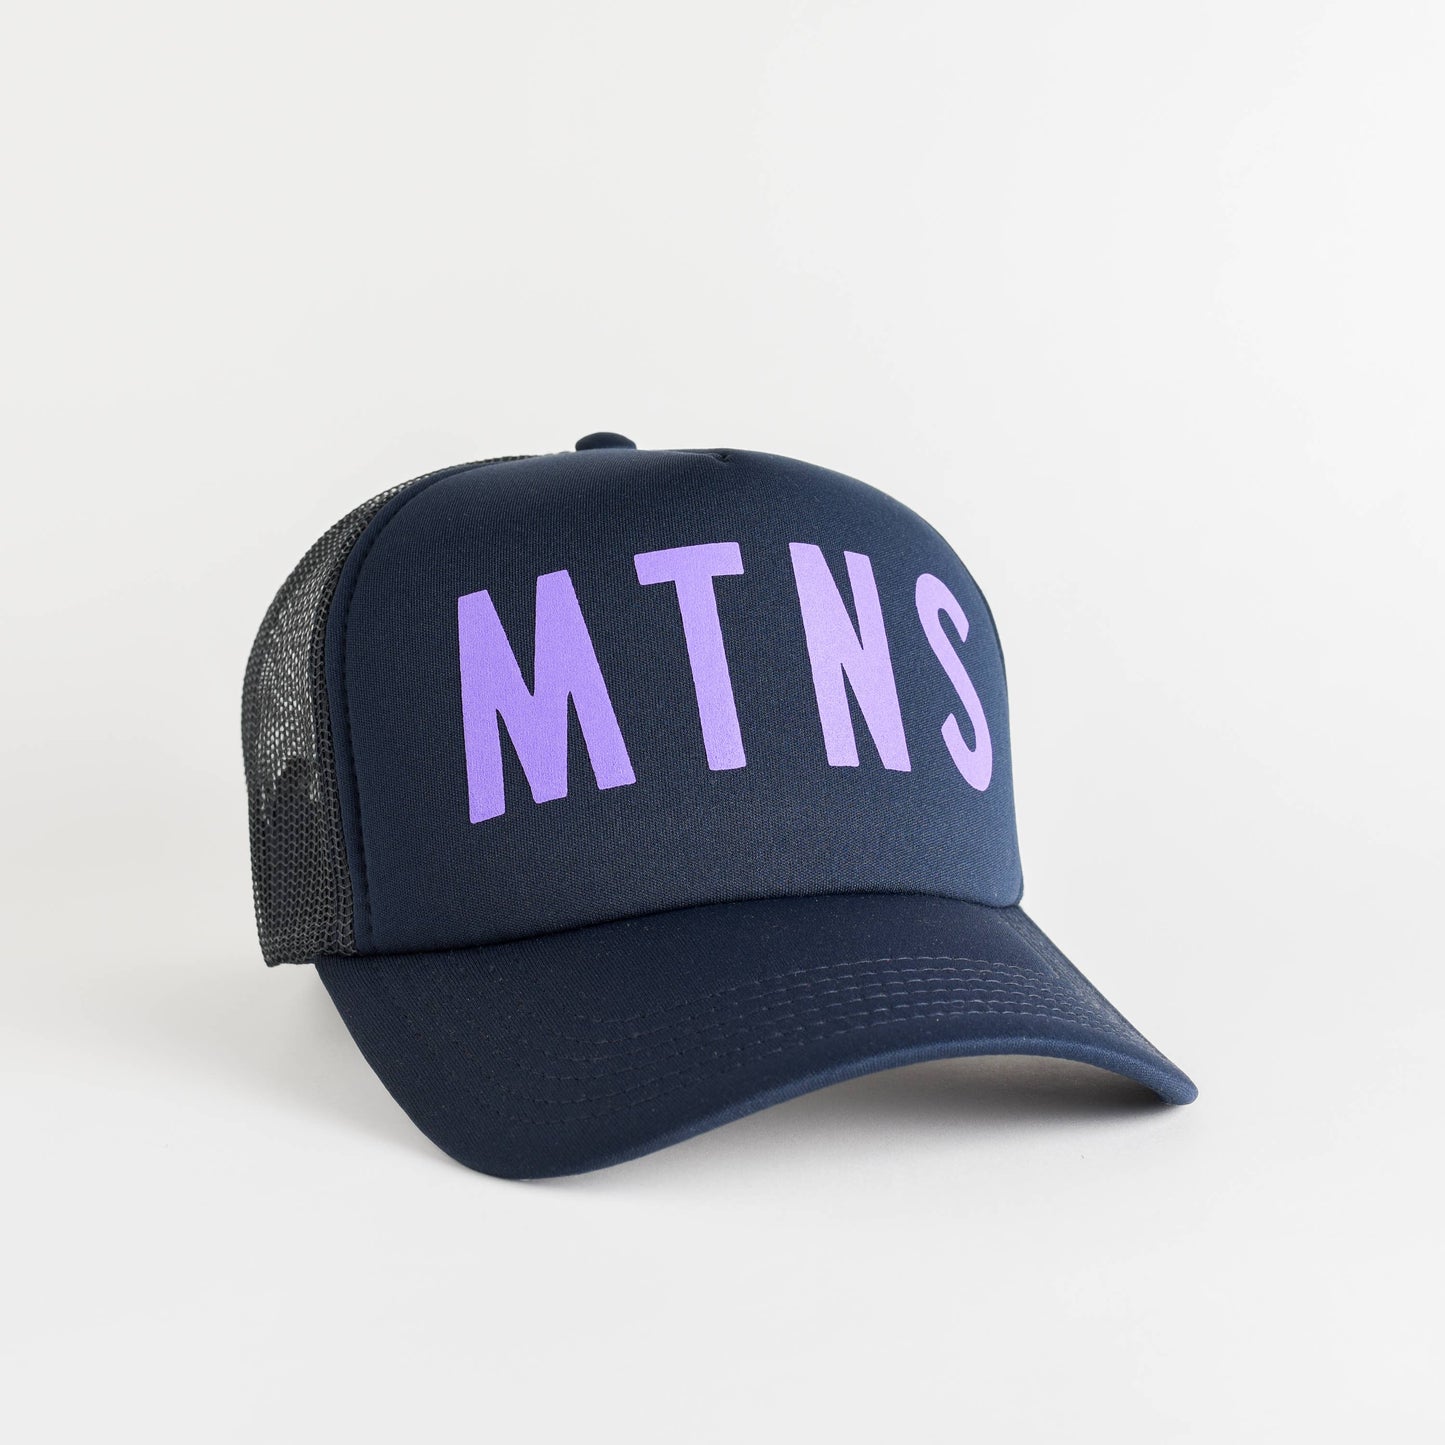 MTNS Recycled Woman's Trucker Hat - navy